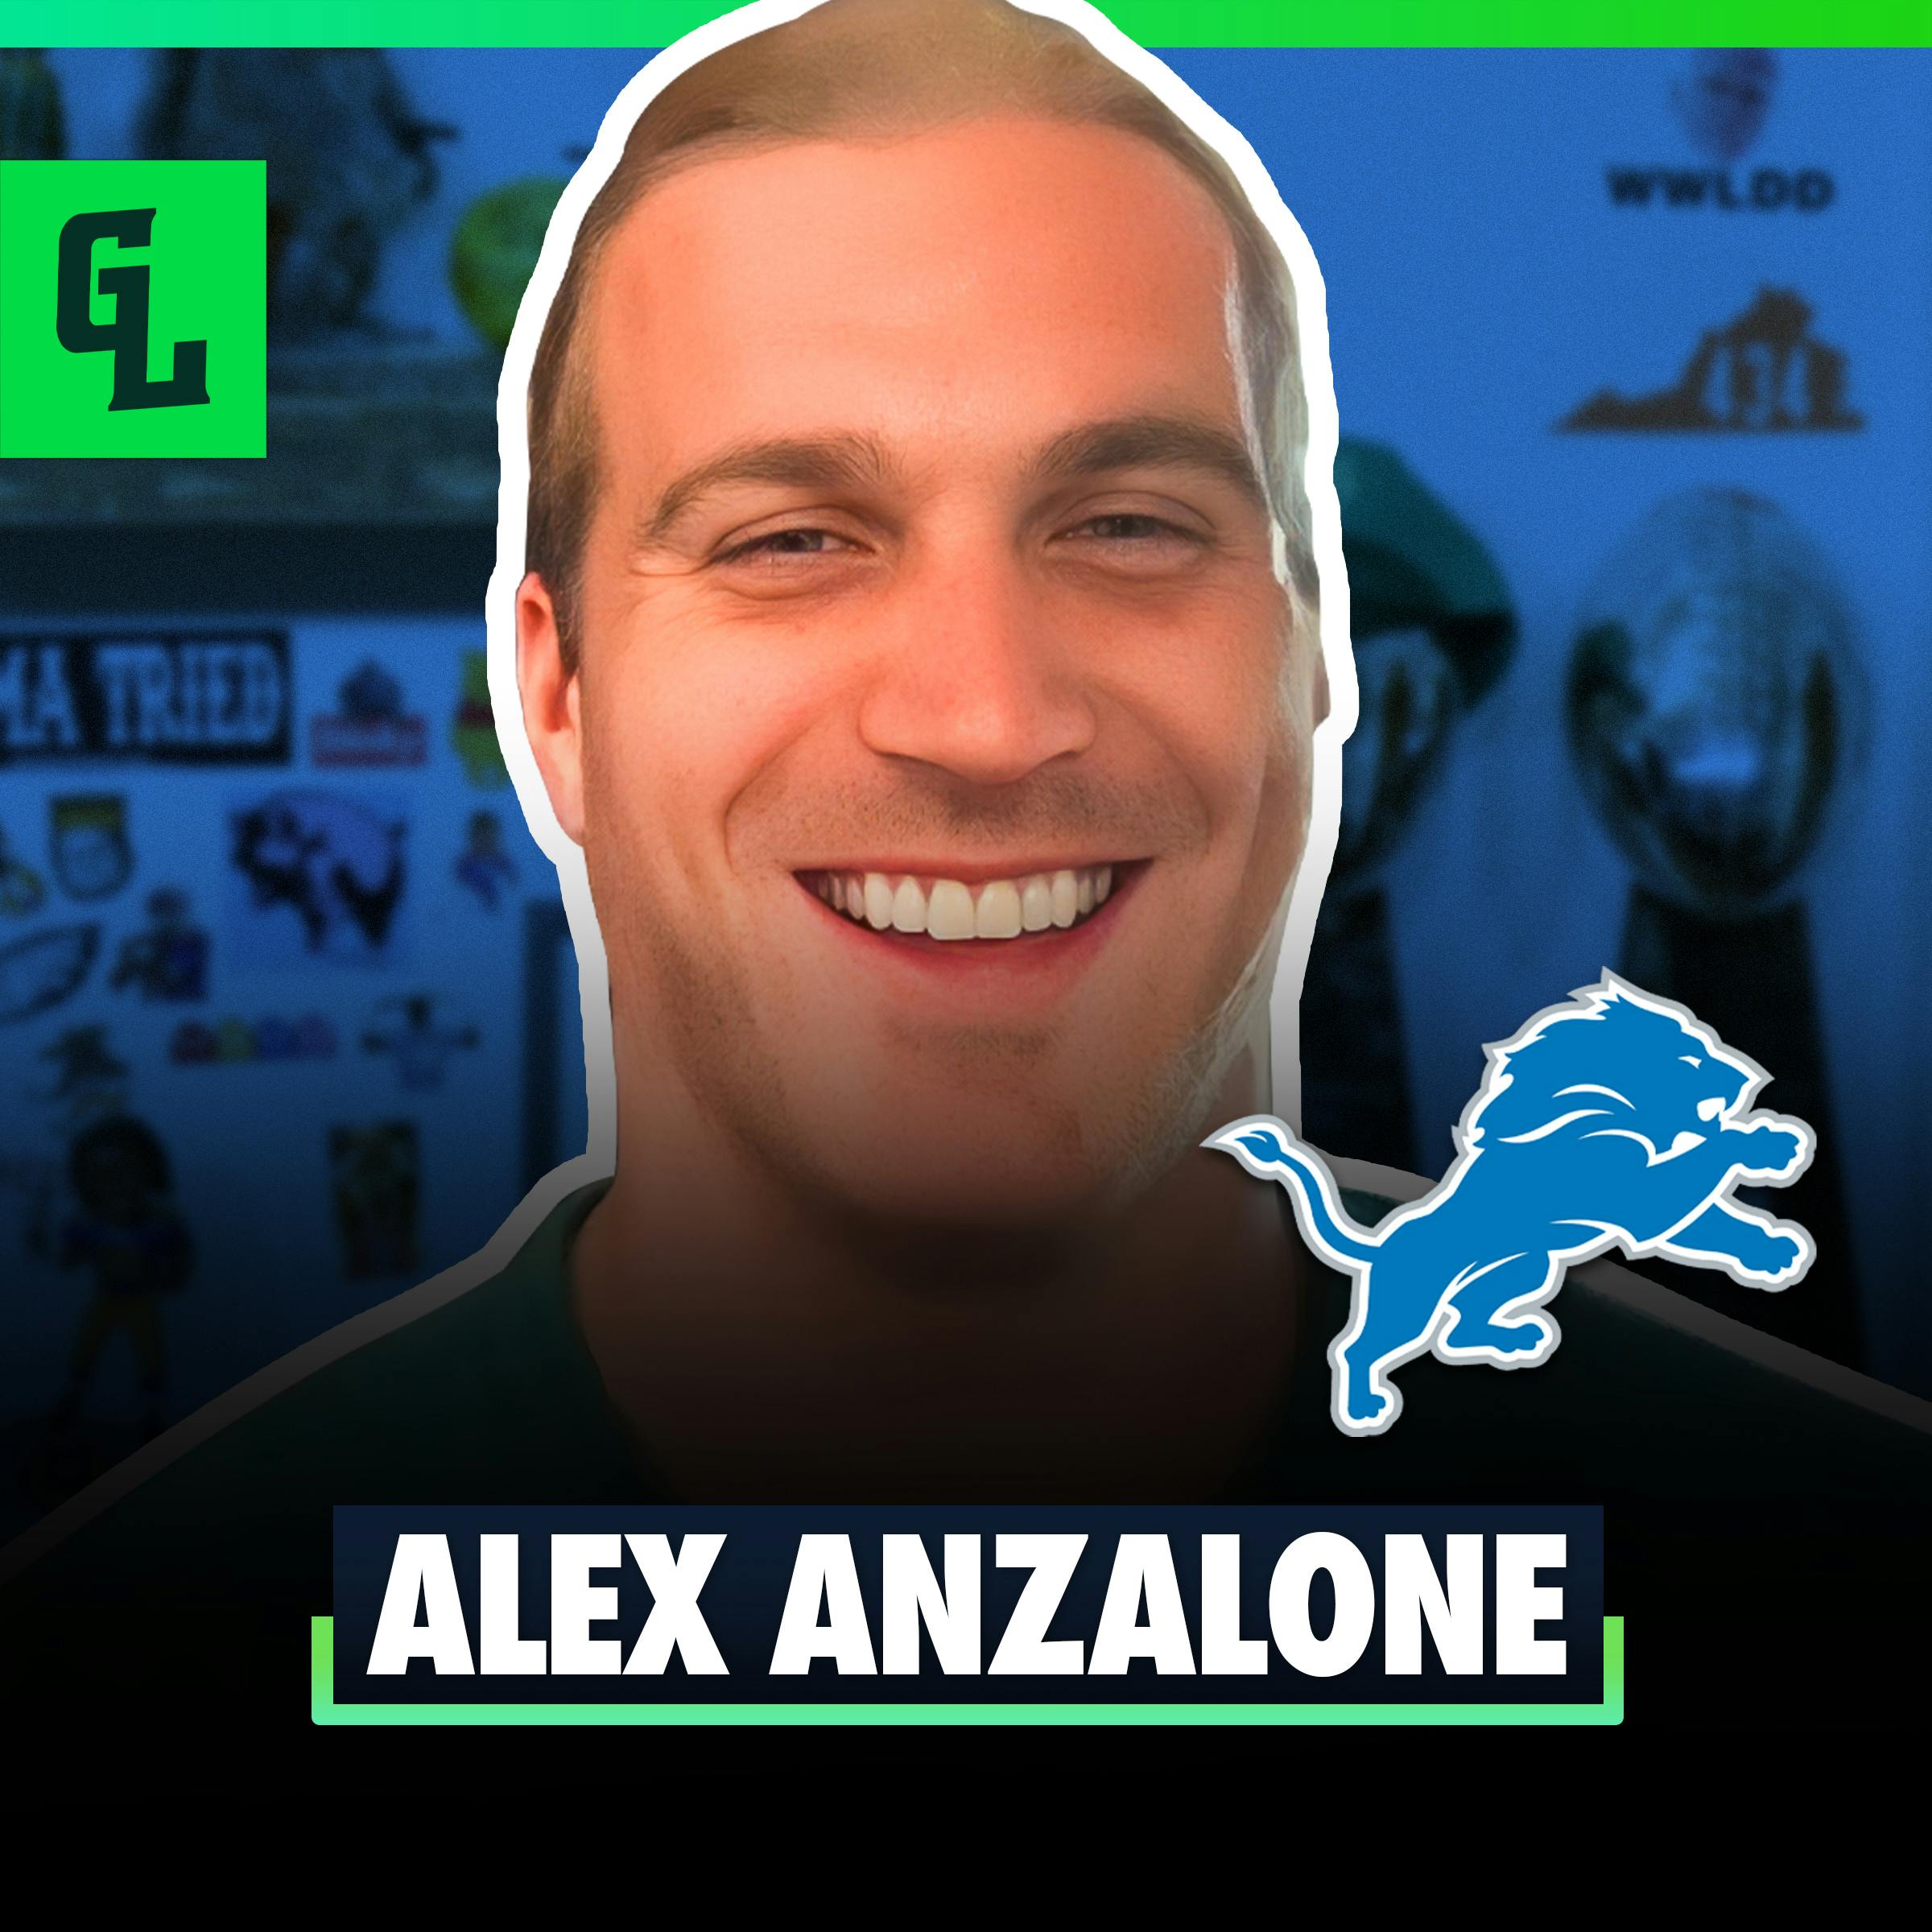 Alex Anzalone! Dan Campbell Stories, Lions 2023 Success & NFC North Competitiveness. Mailbag!